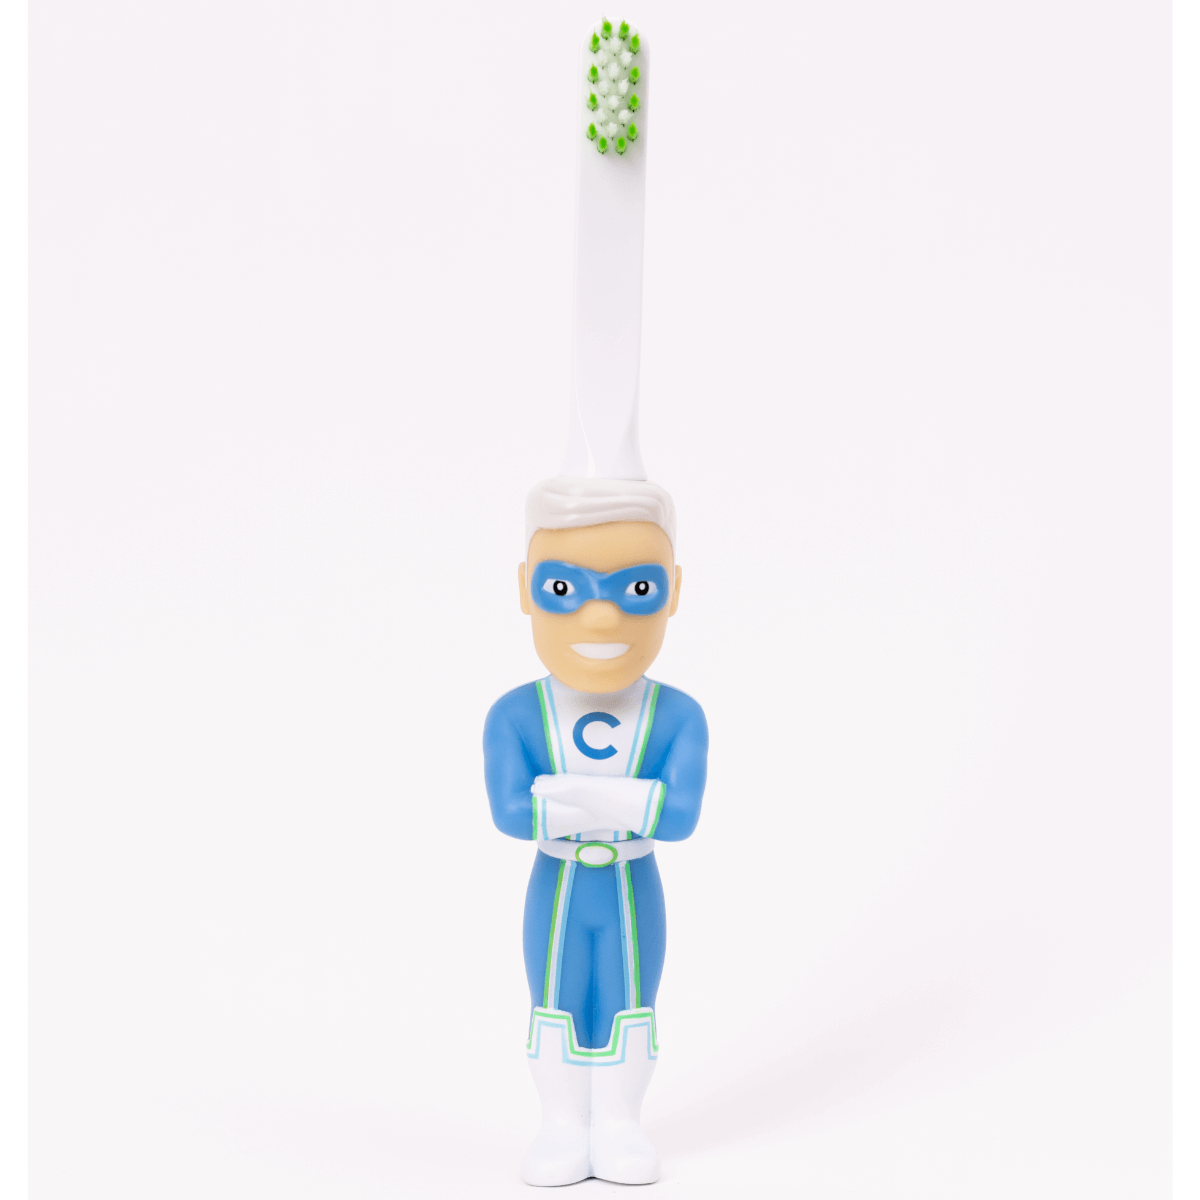 Blue-costumed man depicted on a Captain Cavity toothbrush